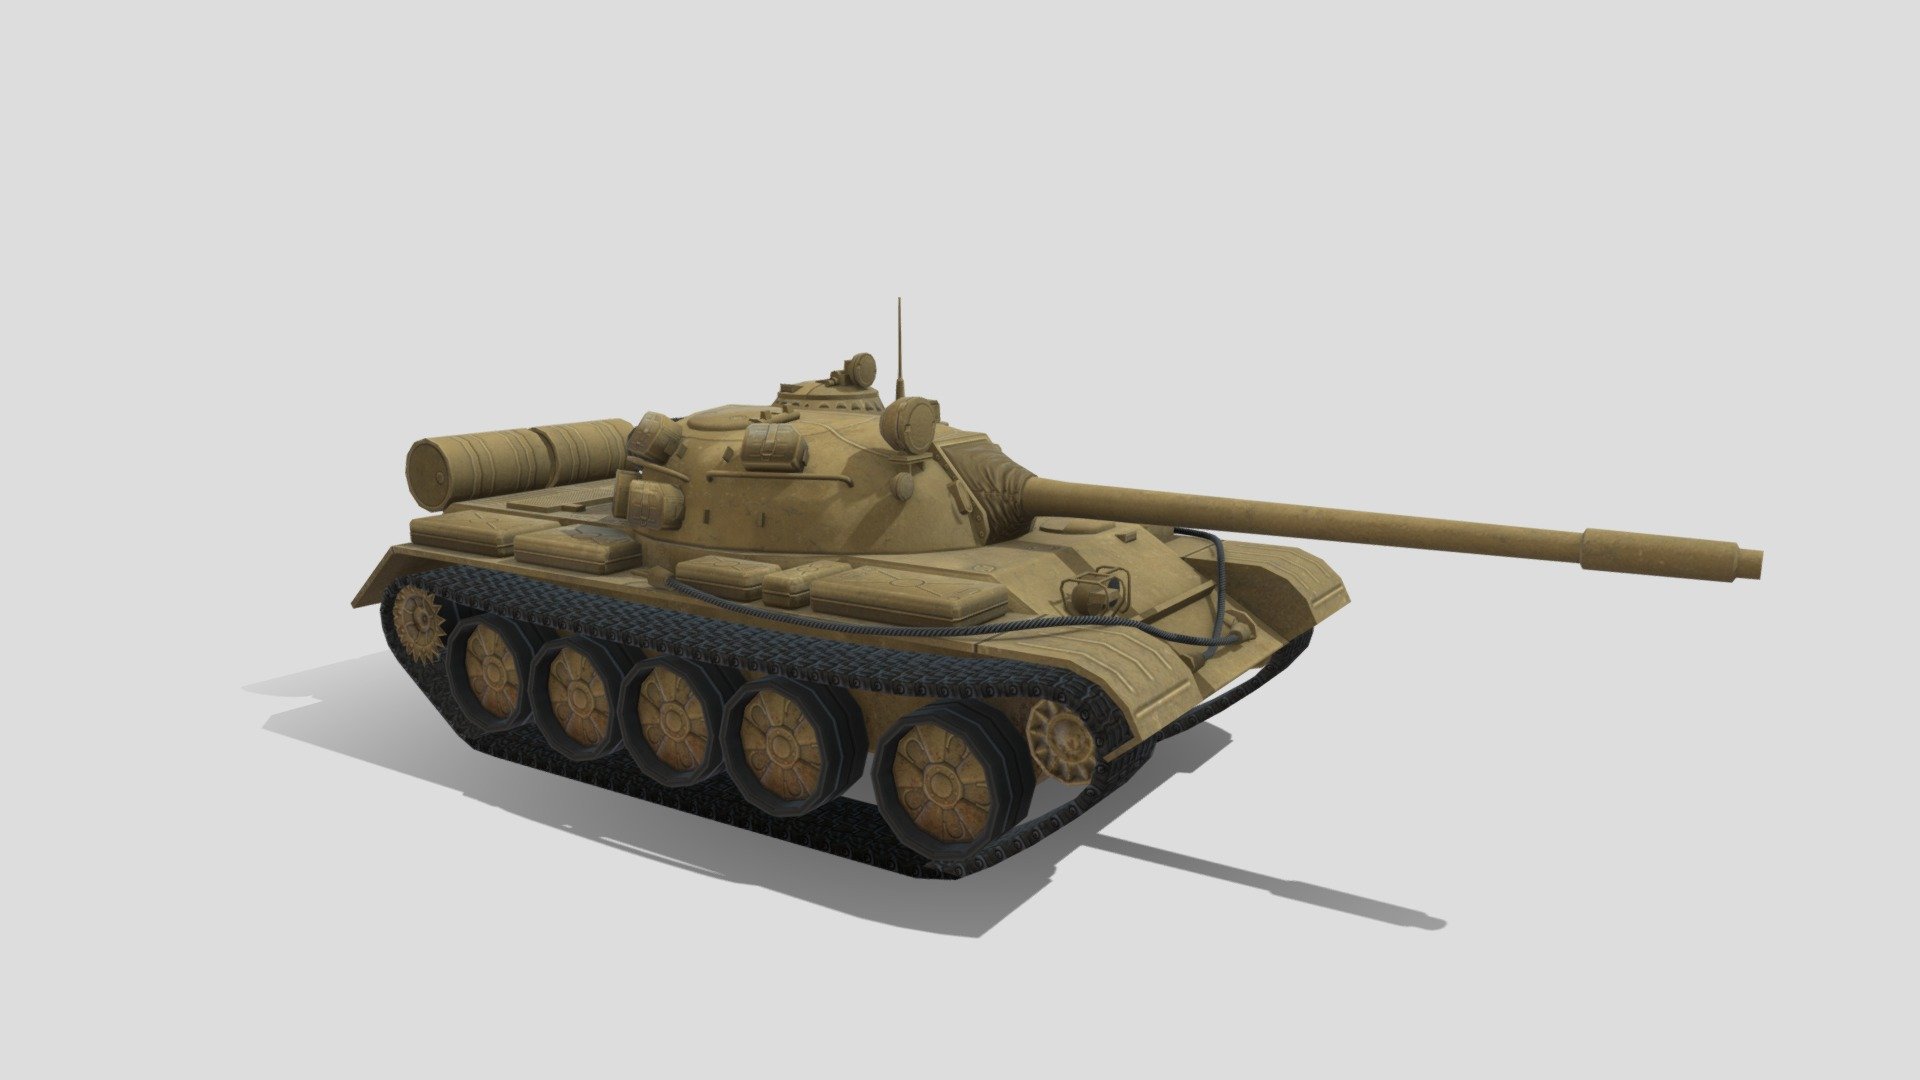 3D Battle Tank
The pack has highly detailed battle tank ready for use in your project. Just drag and drop prefab into your scene and achieve beautiful results in no time. Available formats FBX, 3DS Max 2017



We are here to empower the creators. Please contact us via the [Contact US](https://aaanimators.com/#contact-area) page if you are having issues with our assets. 




The following document provides a highly detailed description of the asset:
[READ ME](https://medium.com/@aaanimators/3d-asset-pack-low-poly-tables-pack-arabic-21125c8bb0f7)




**Mesh complexities:**


T-55 6591 verts; 6486 tris uv 

T-55_track 510 verts; 800 tris uv 



Includes 2 sets of materials with 3 textures:



● Diffuse

● Normal

● Specular - Low Poly Battle Tank - Buy Royalty Free 3D model by aaanimators 3d model